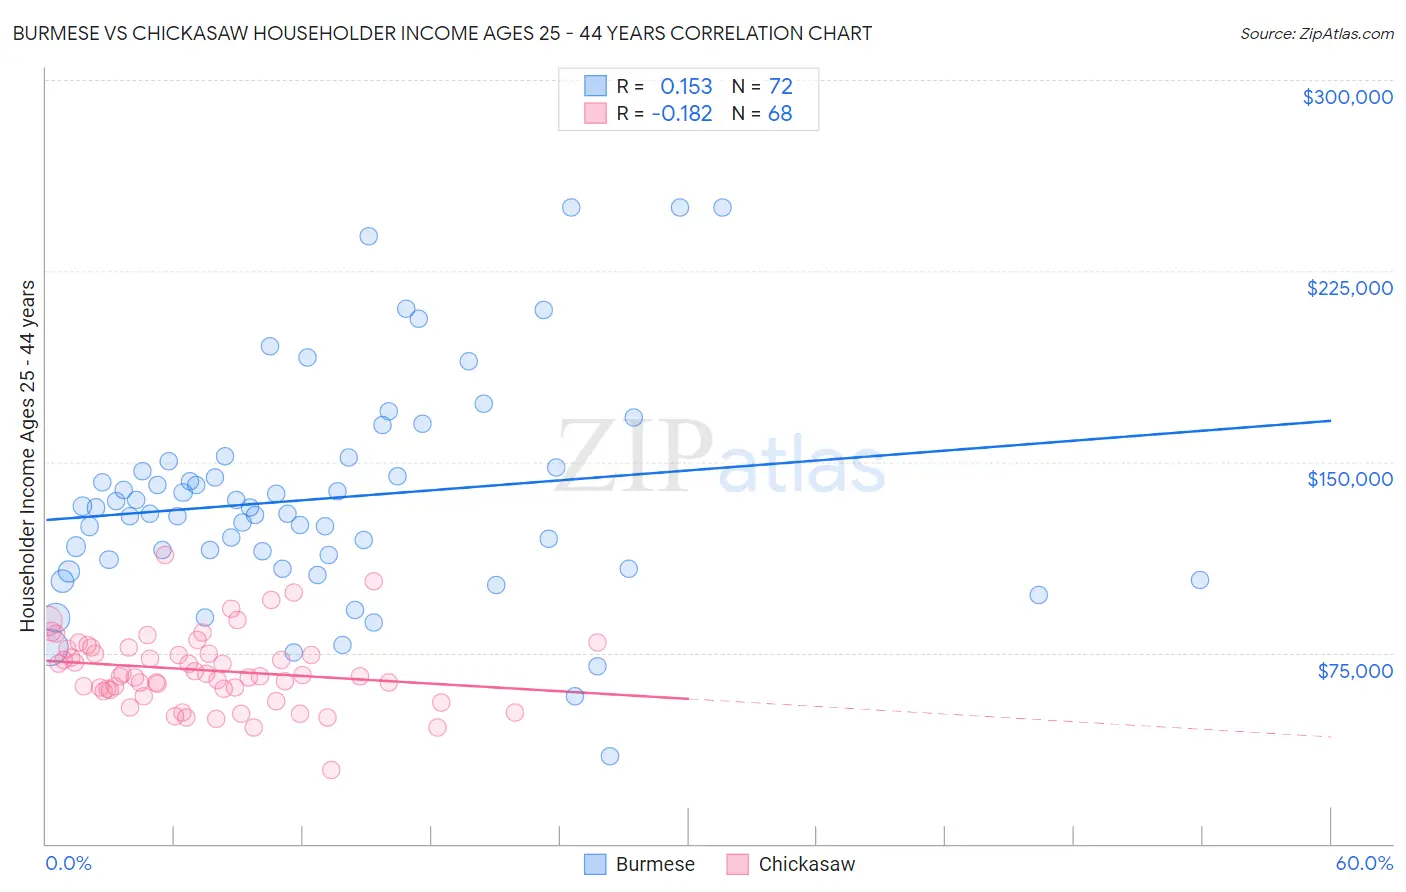 Burmese vs Chickasaw Householder Income Ages 25 - 44 years